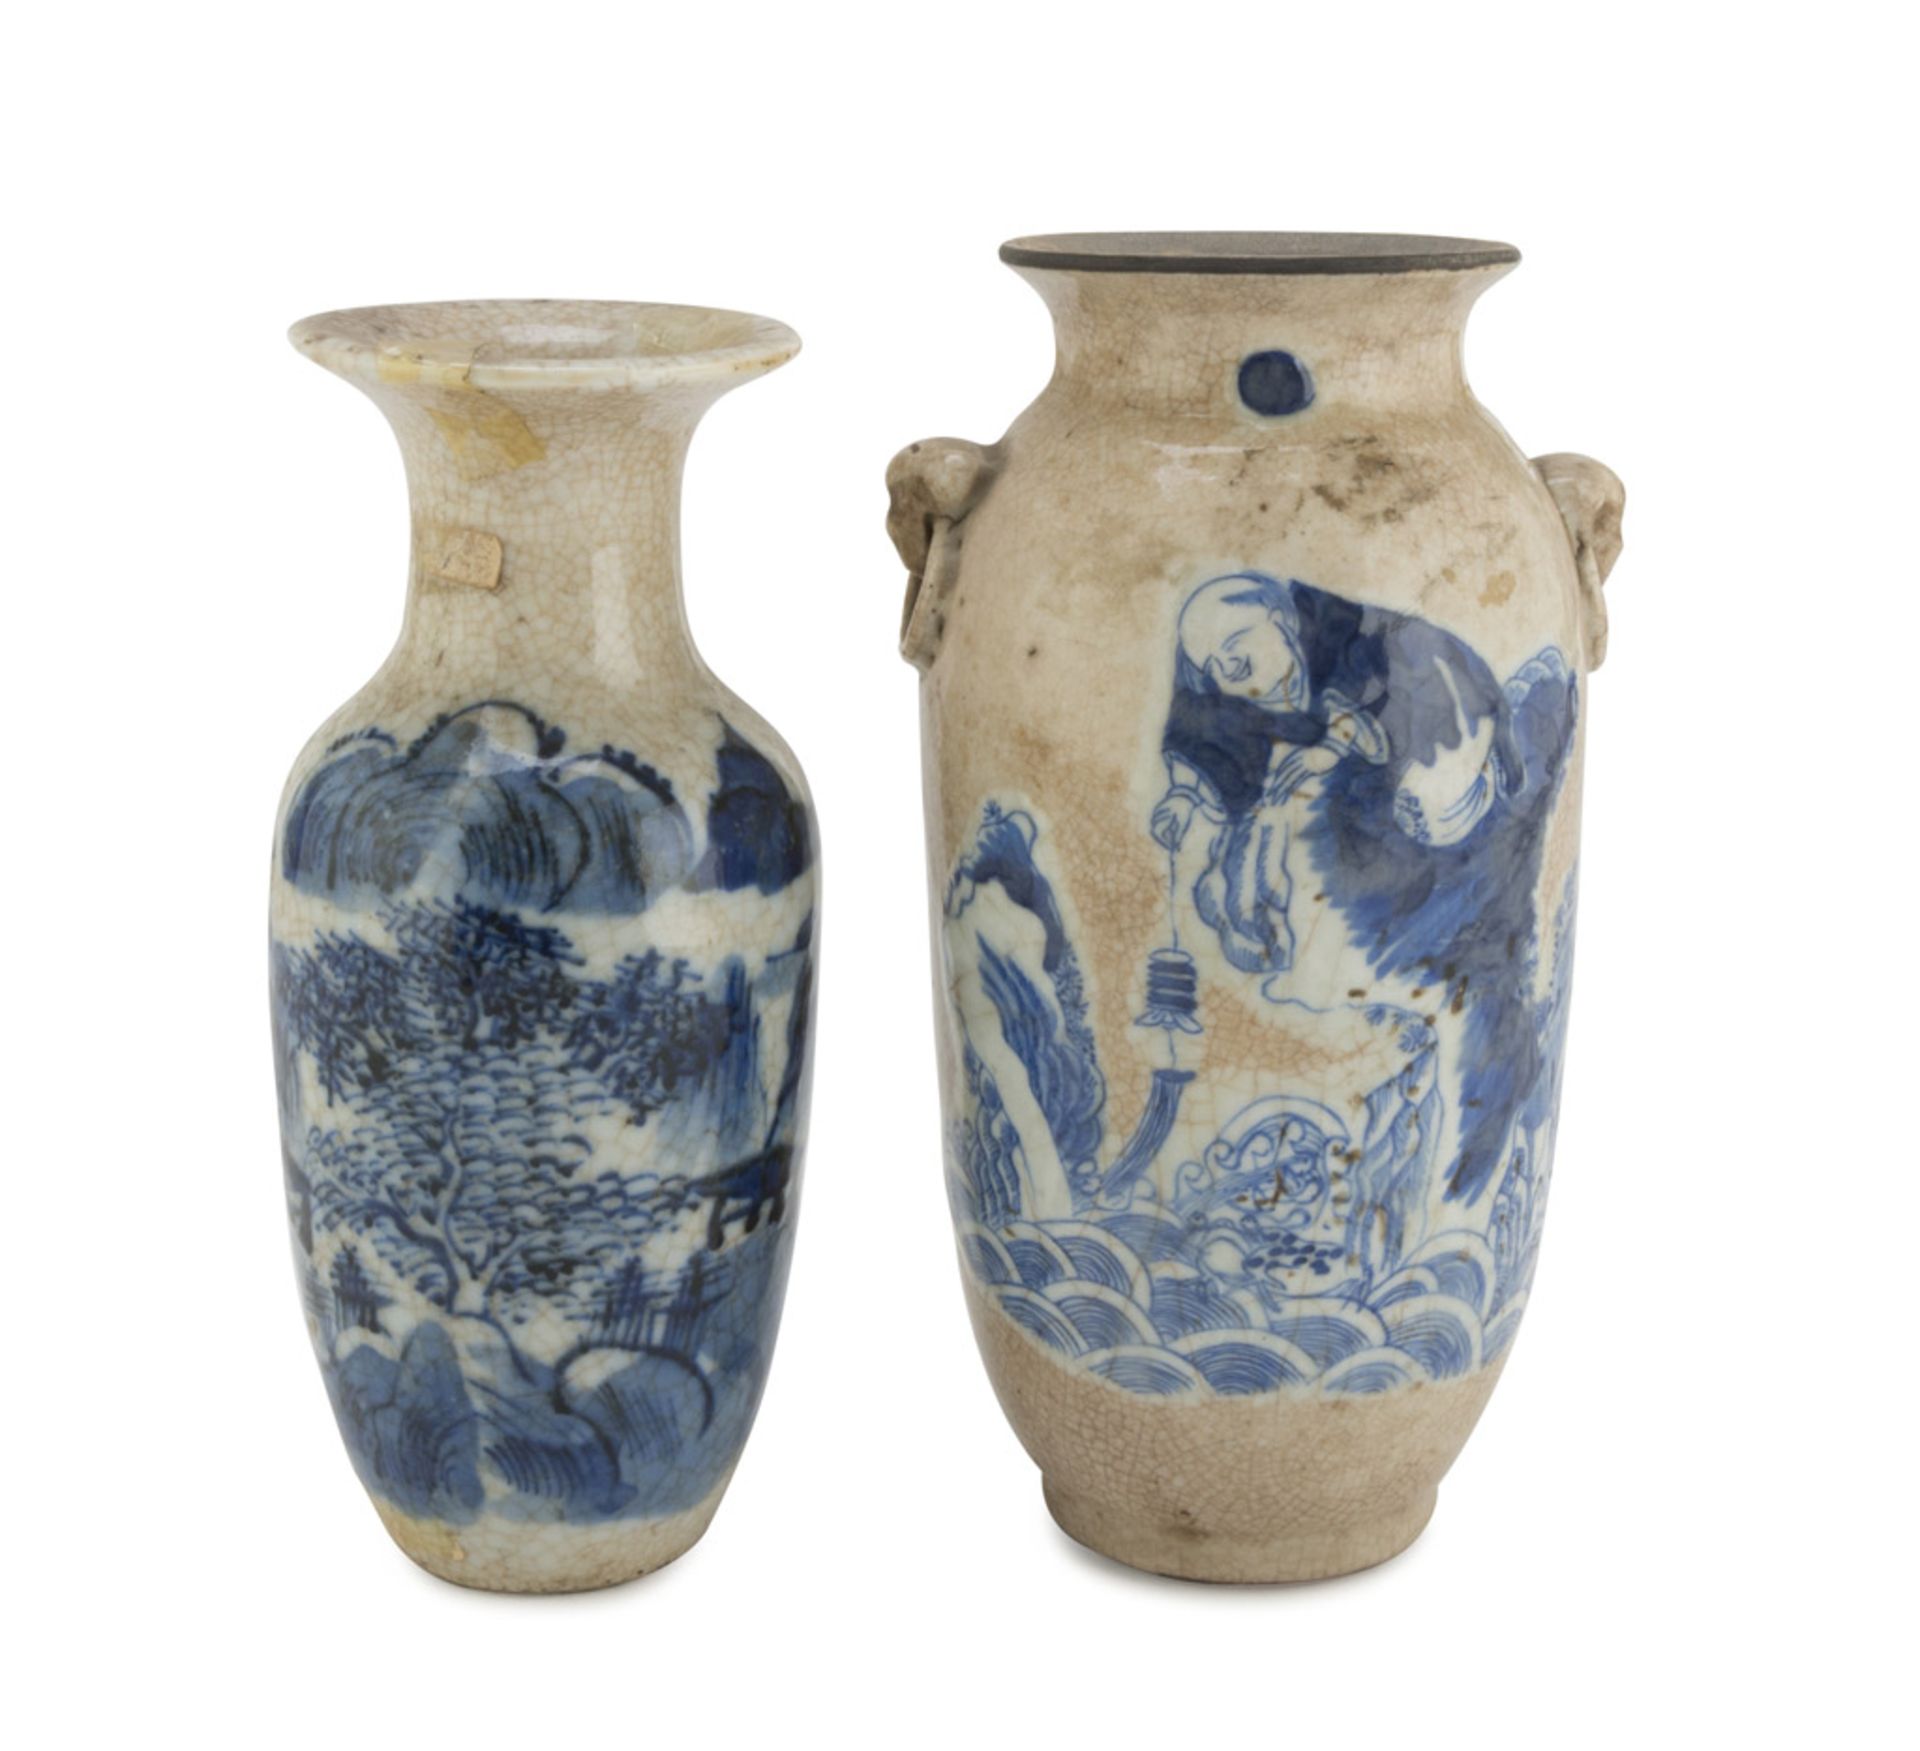 TWO PORCELAIN VASES, CHINA EARLY 20TH CENTURY decorated with warriors and Taoist divinity.